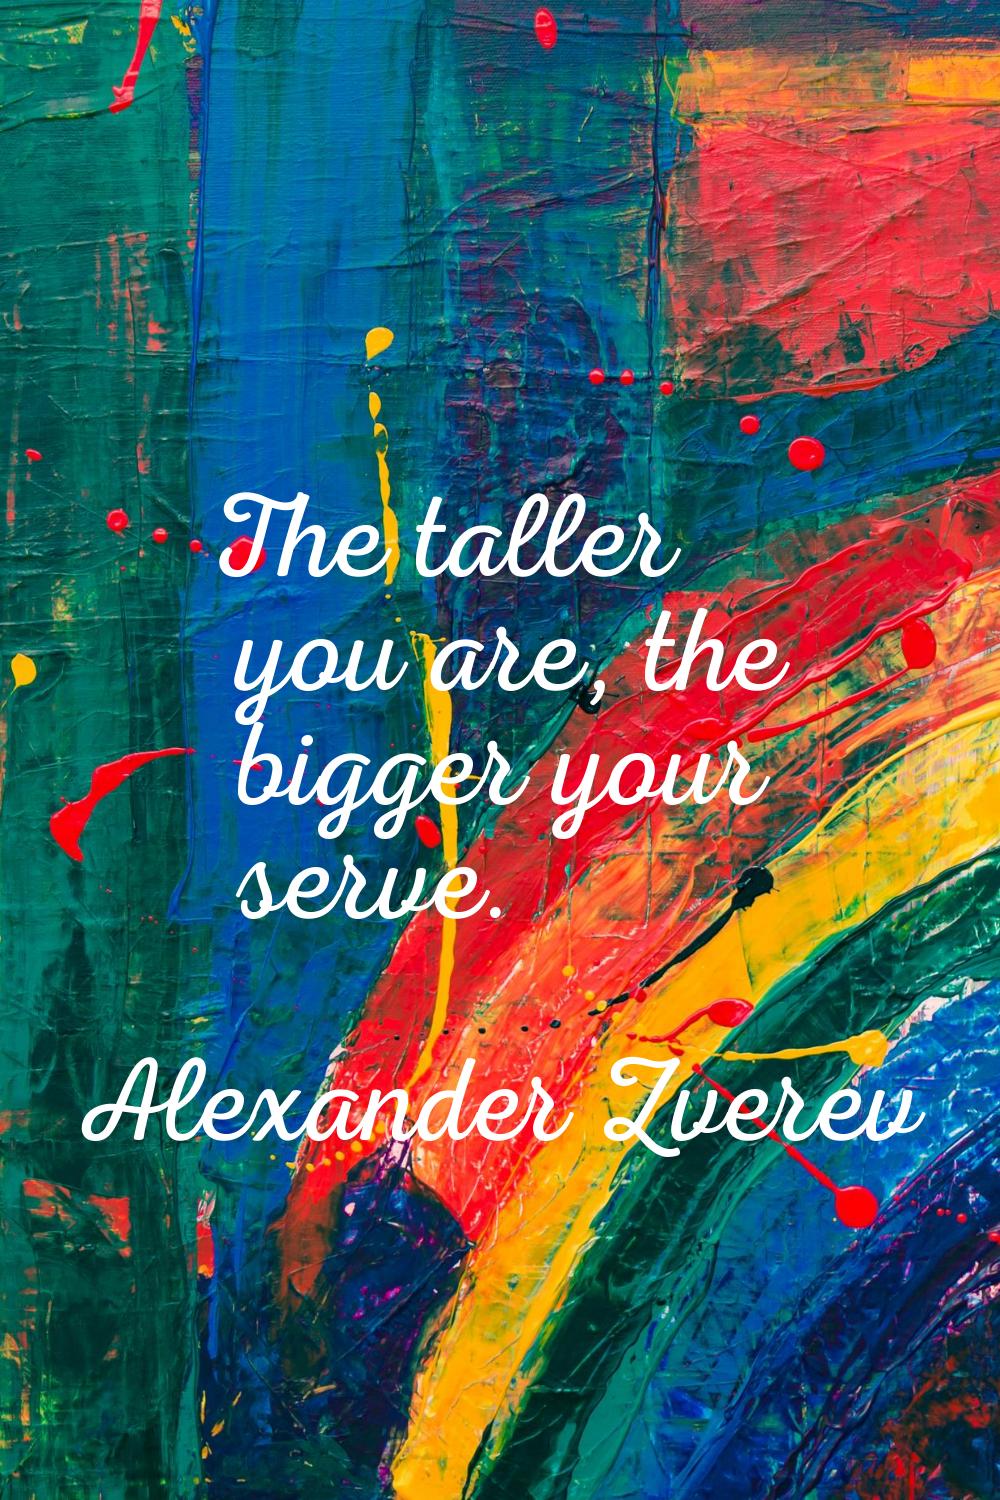 The taller you are, the bigger your serve.